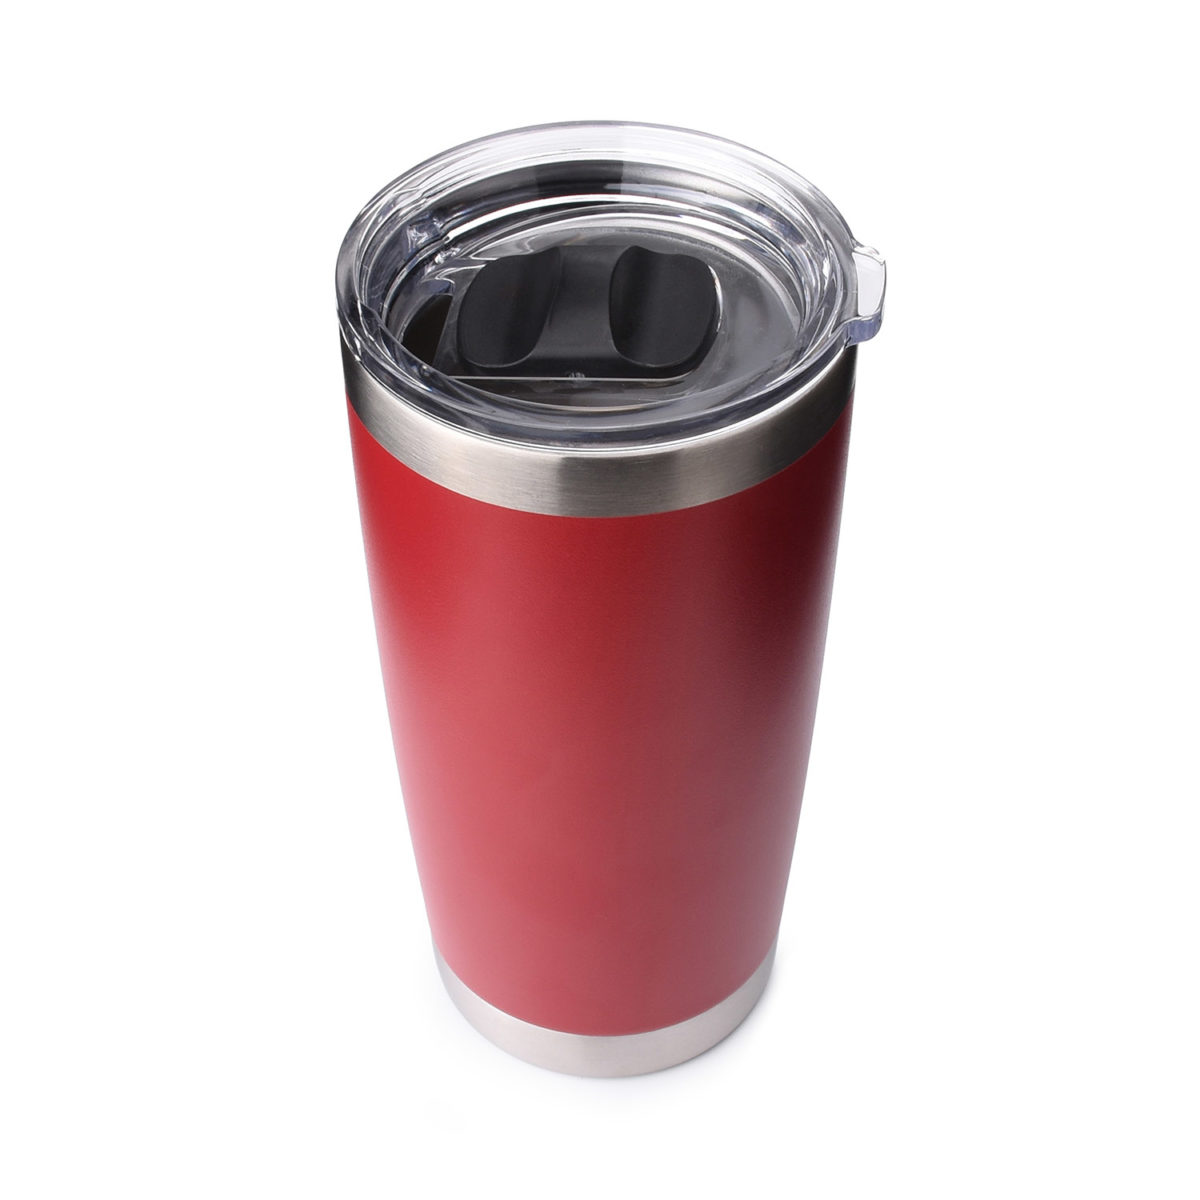 https://www.waterbottle.tech/wp-content/uploads/2021/05/20-oz-tumbler-with-magnetic-slider-lid-s2120a3-2-1200x1200.jpg